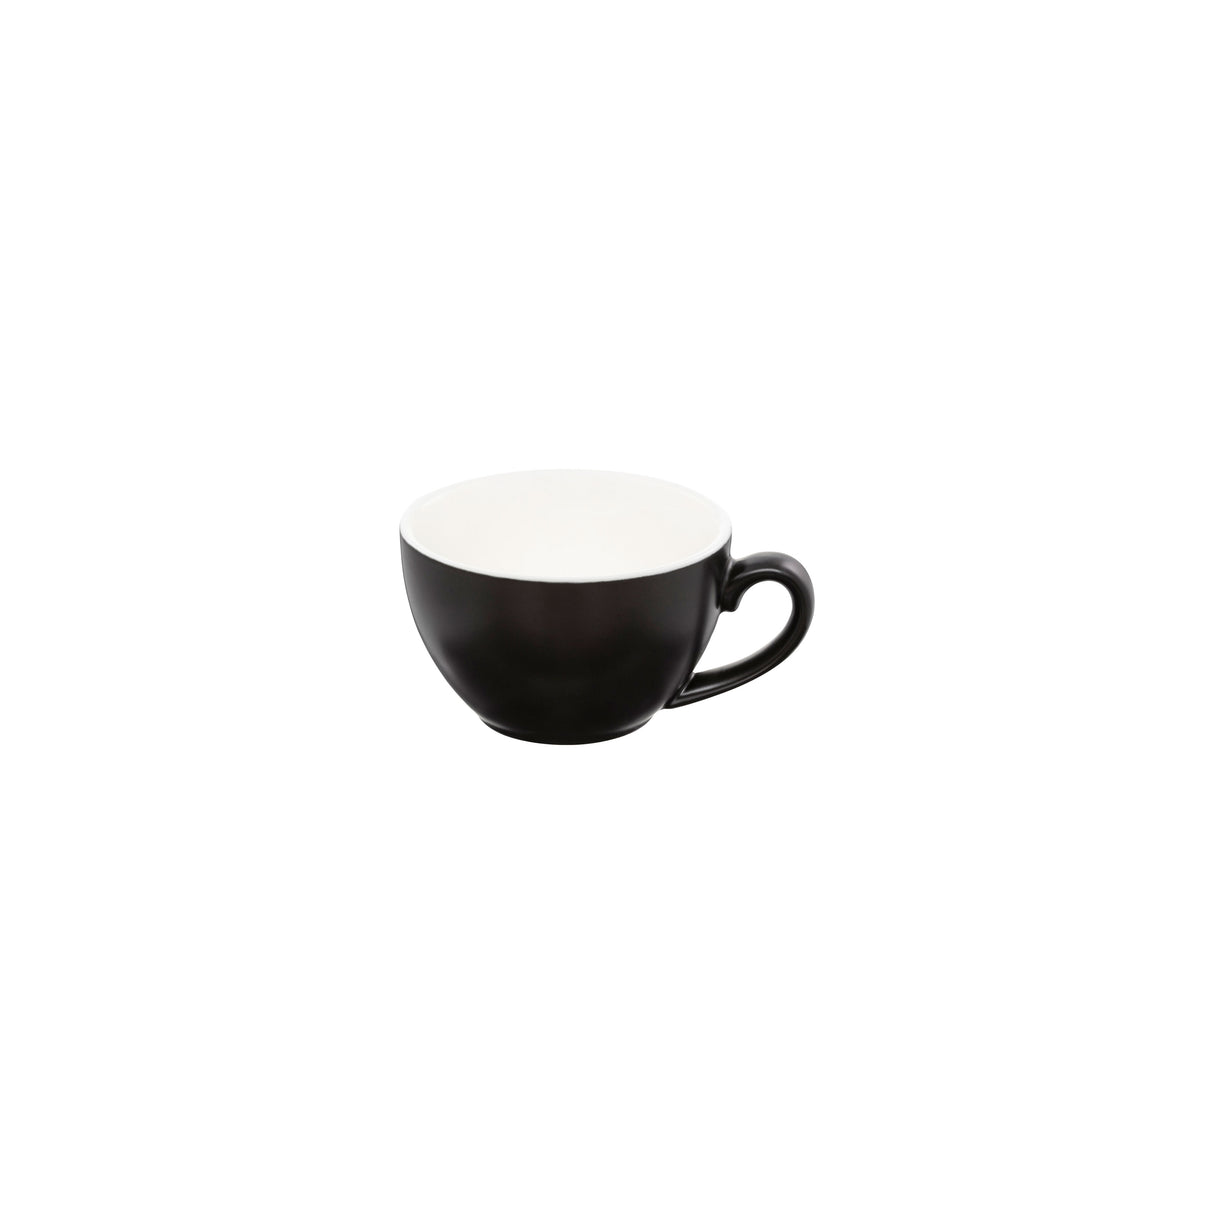 Cappuccino Cup - Raven, 200ml, Intorno: Pack of 6